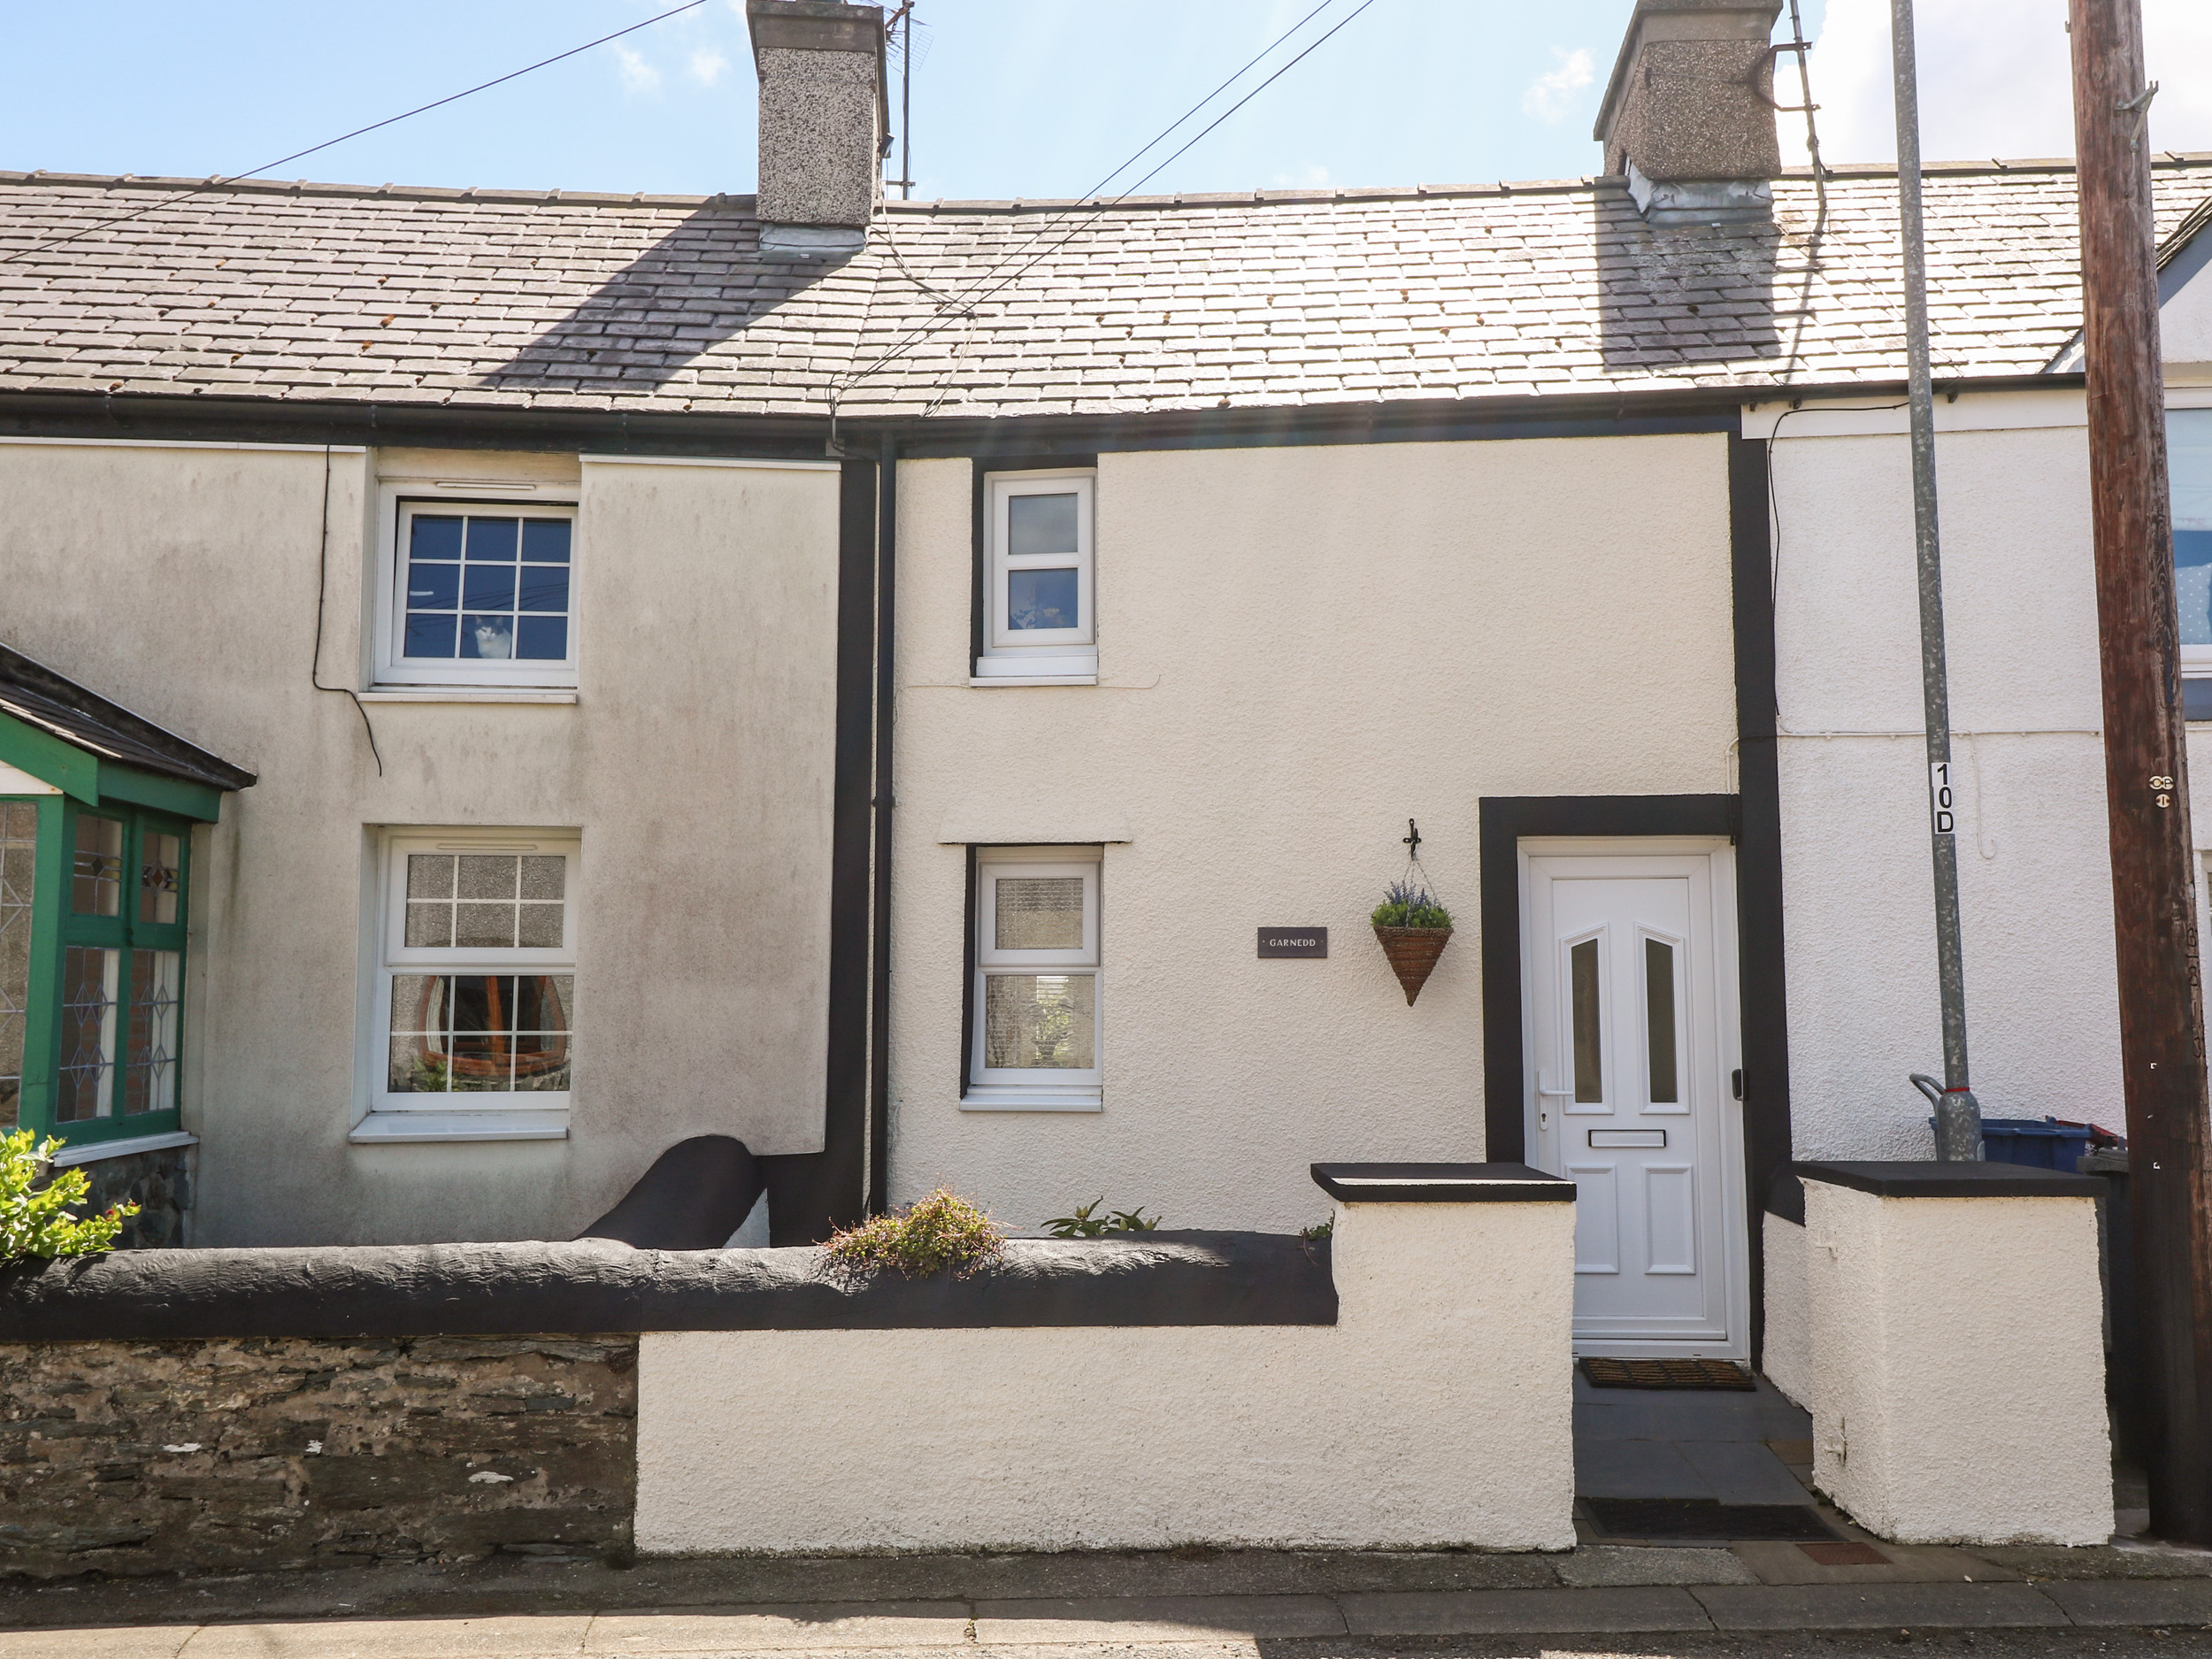 1 bedroom Cottage for rent in Holyhead